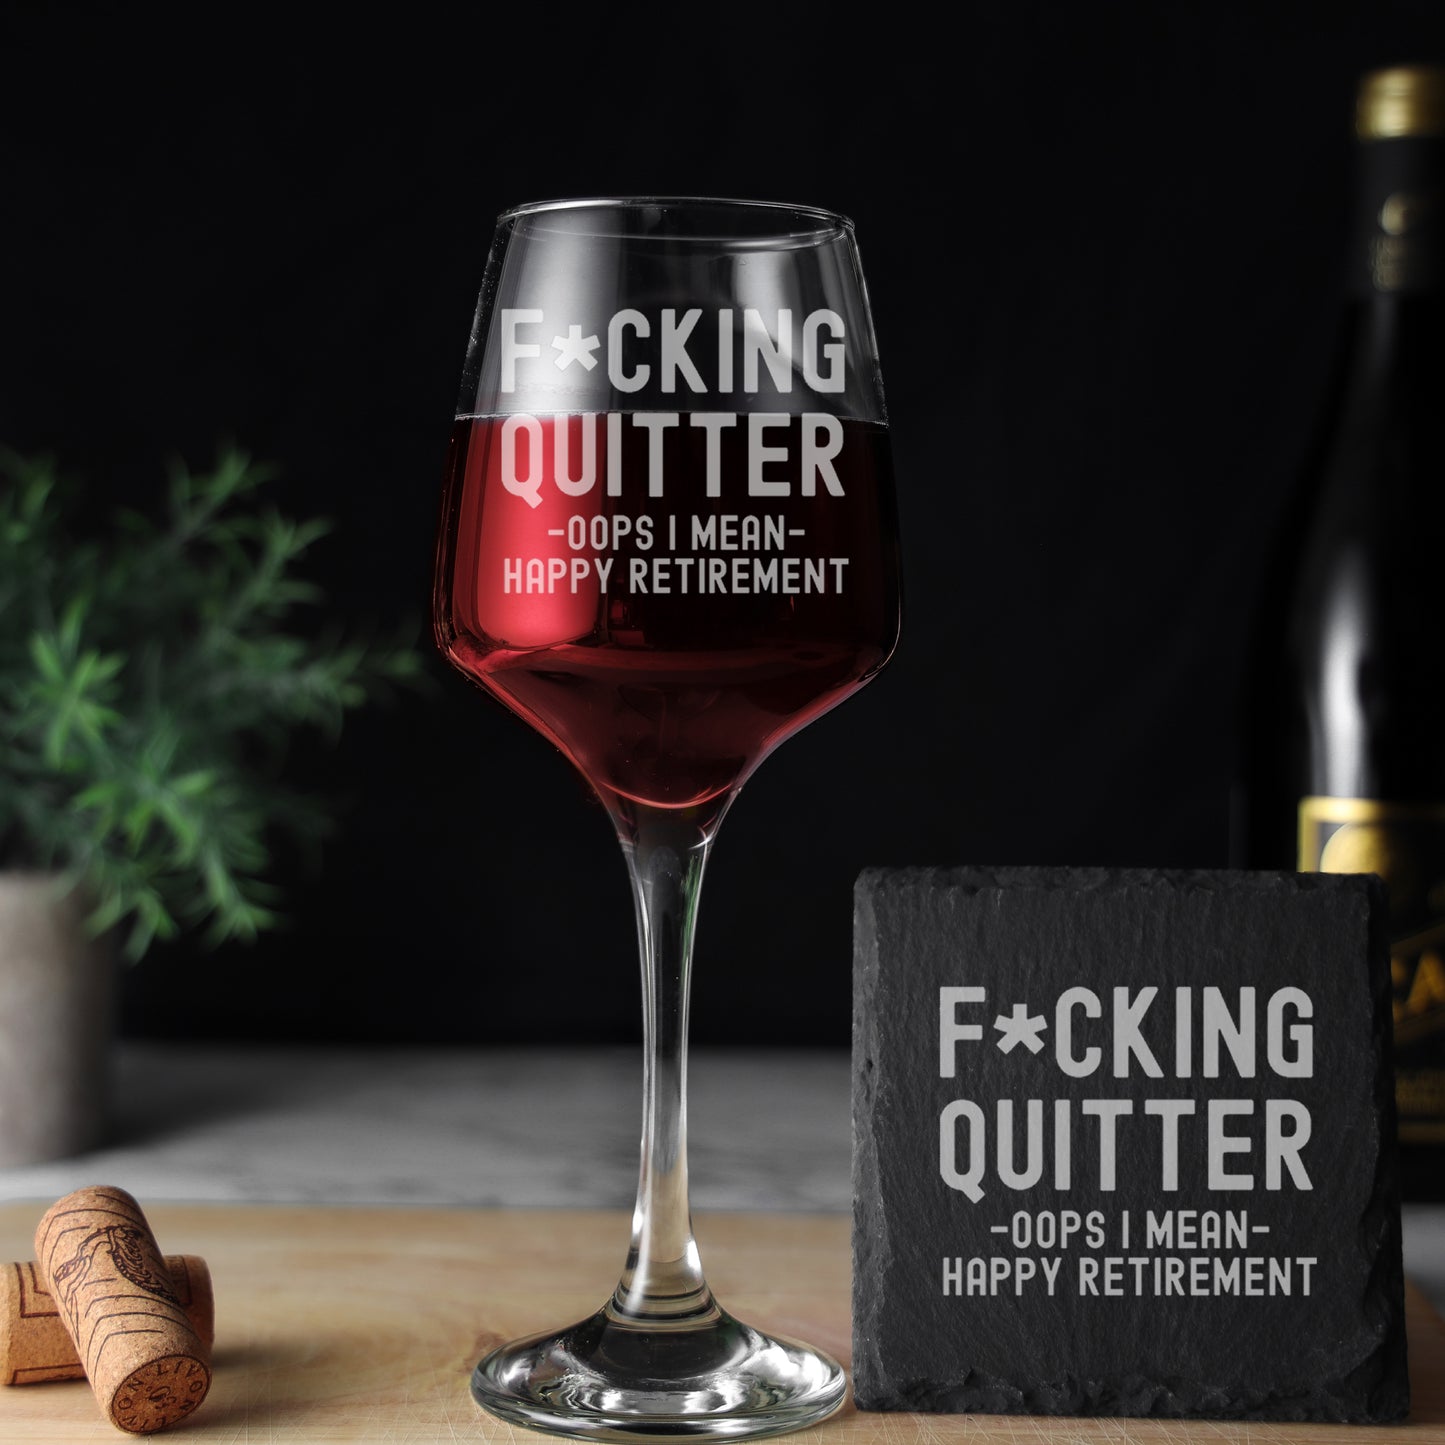 Engraved Funny "F*cking Quitter, Oops I mean Happy Retirement" Wine Glass and/or Coaster Novelty Gift  - Always Looking Good -   